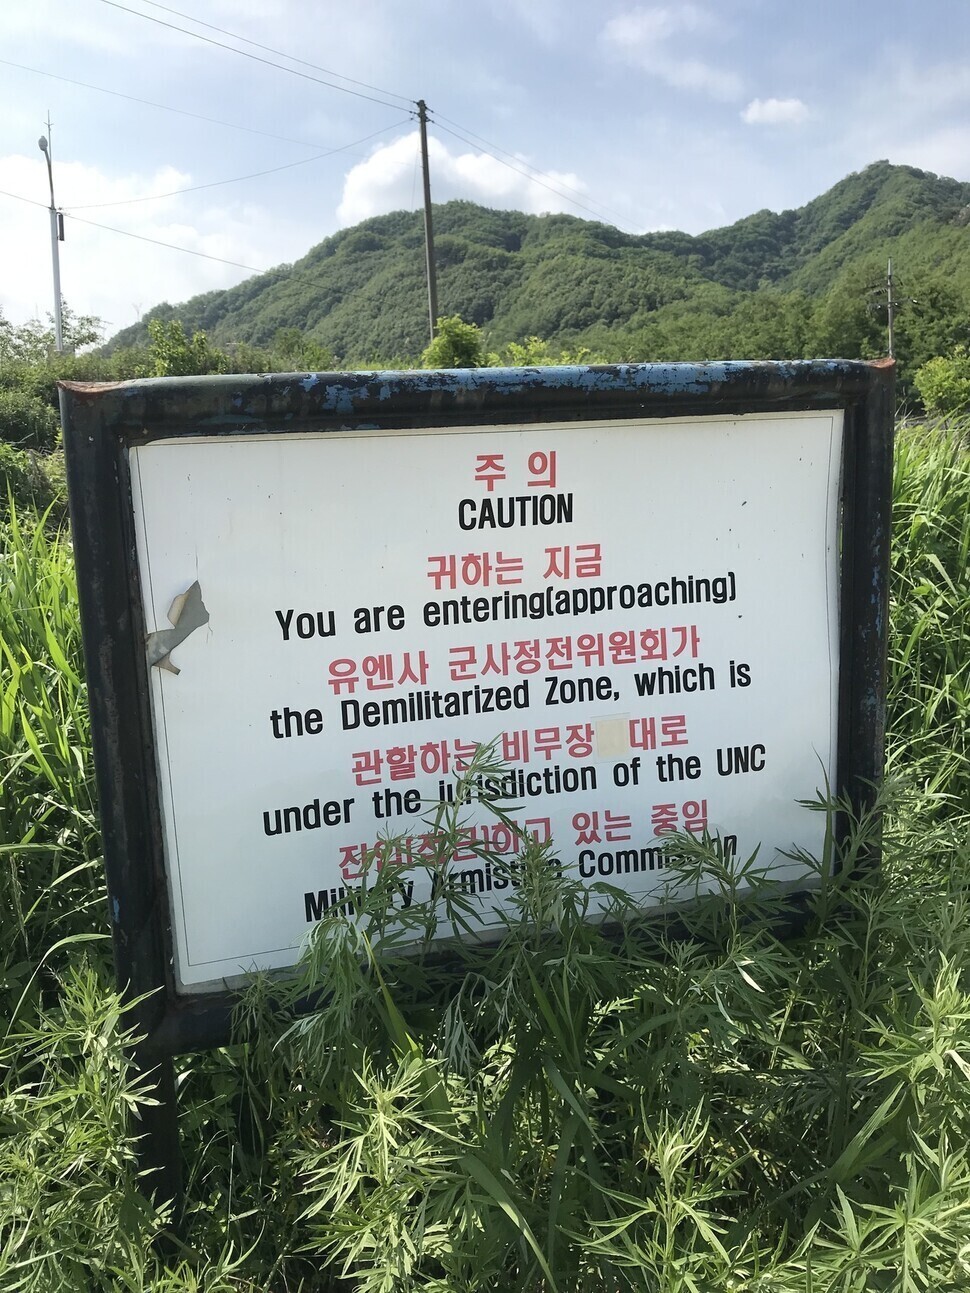 A sign located near the DMZ in Cheorwon, Gangwon Province, says that the DMZ is “under the jurisdiction of the UNC.”